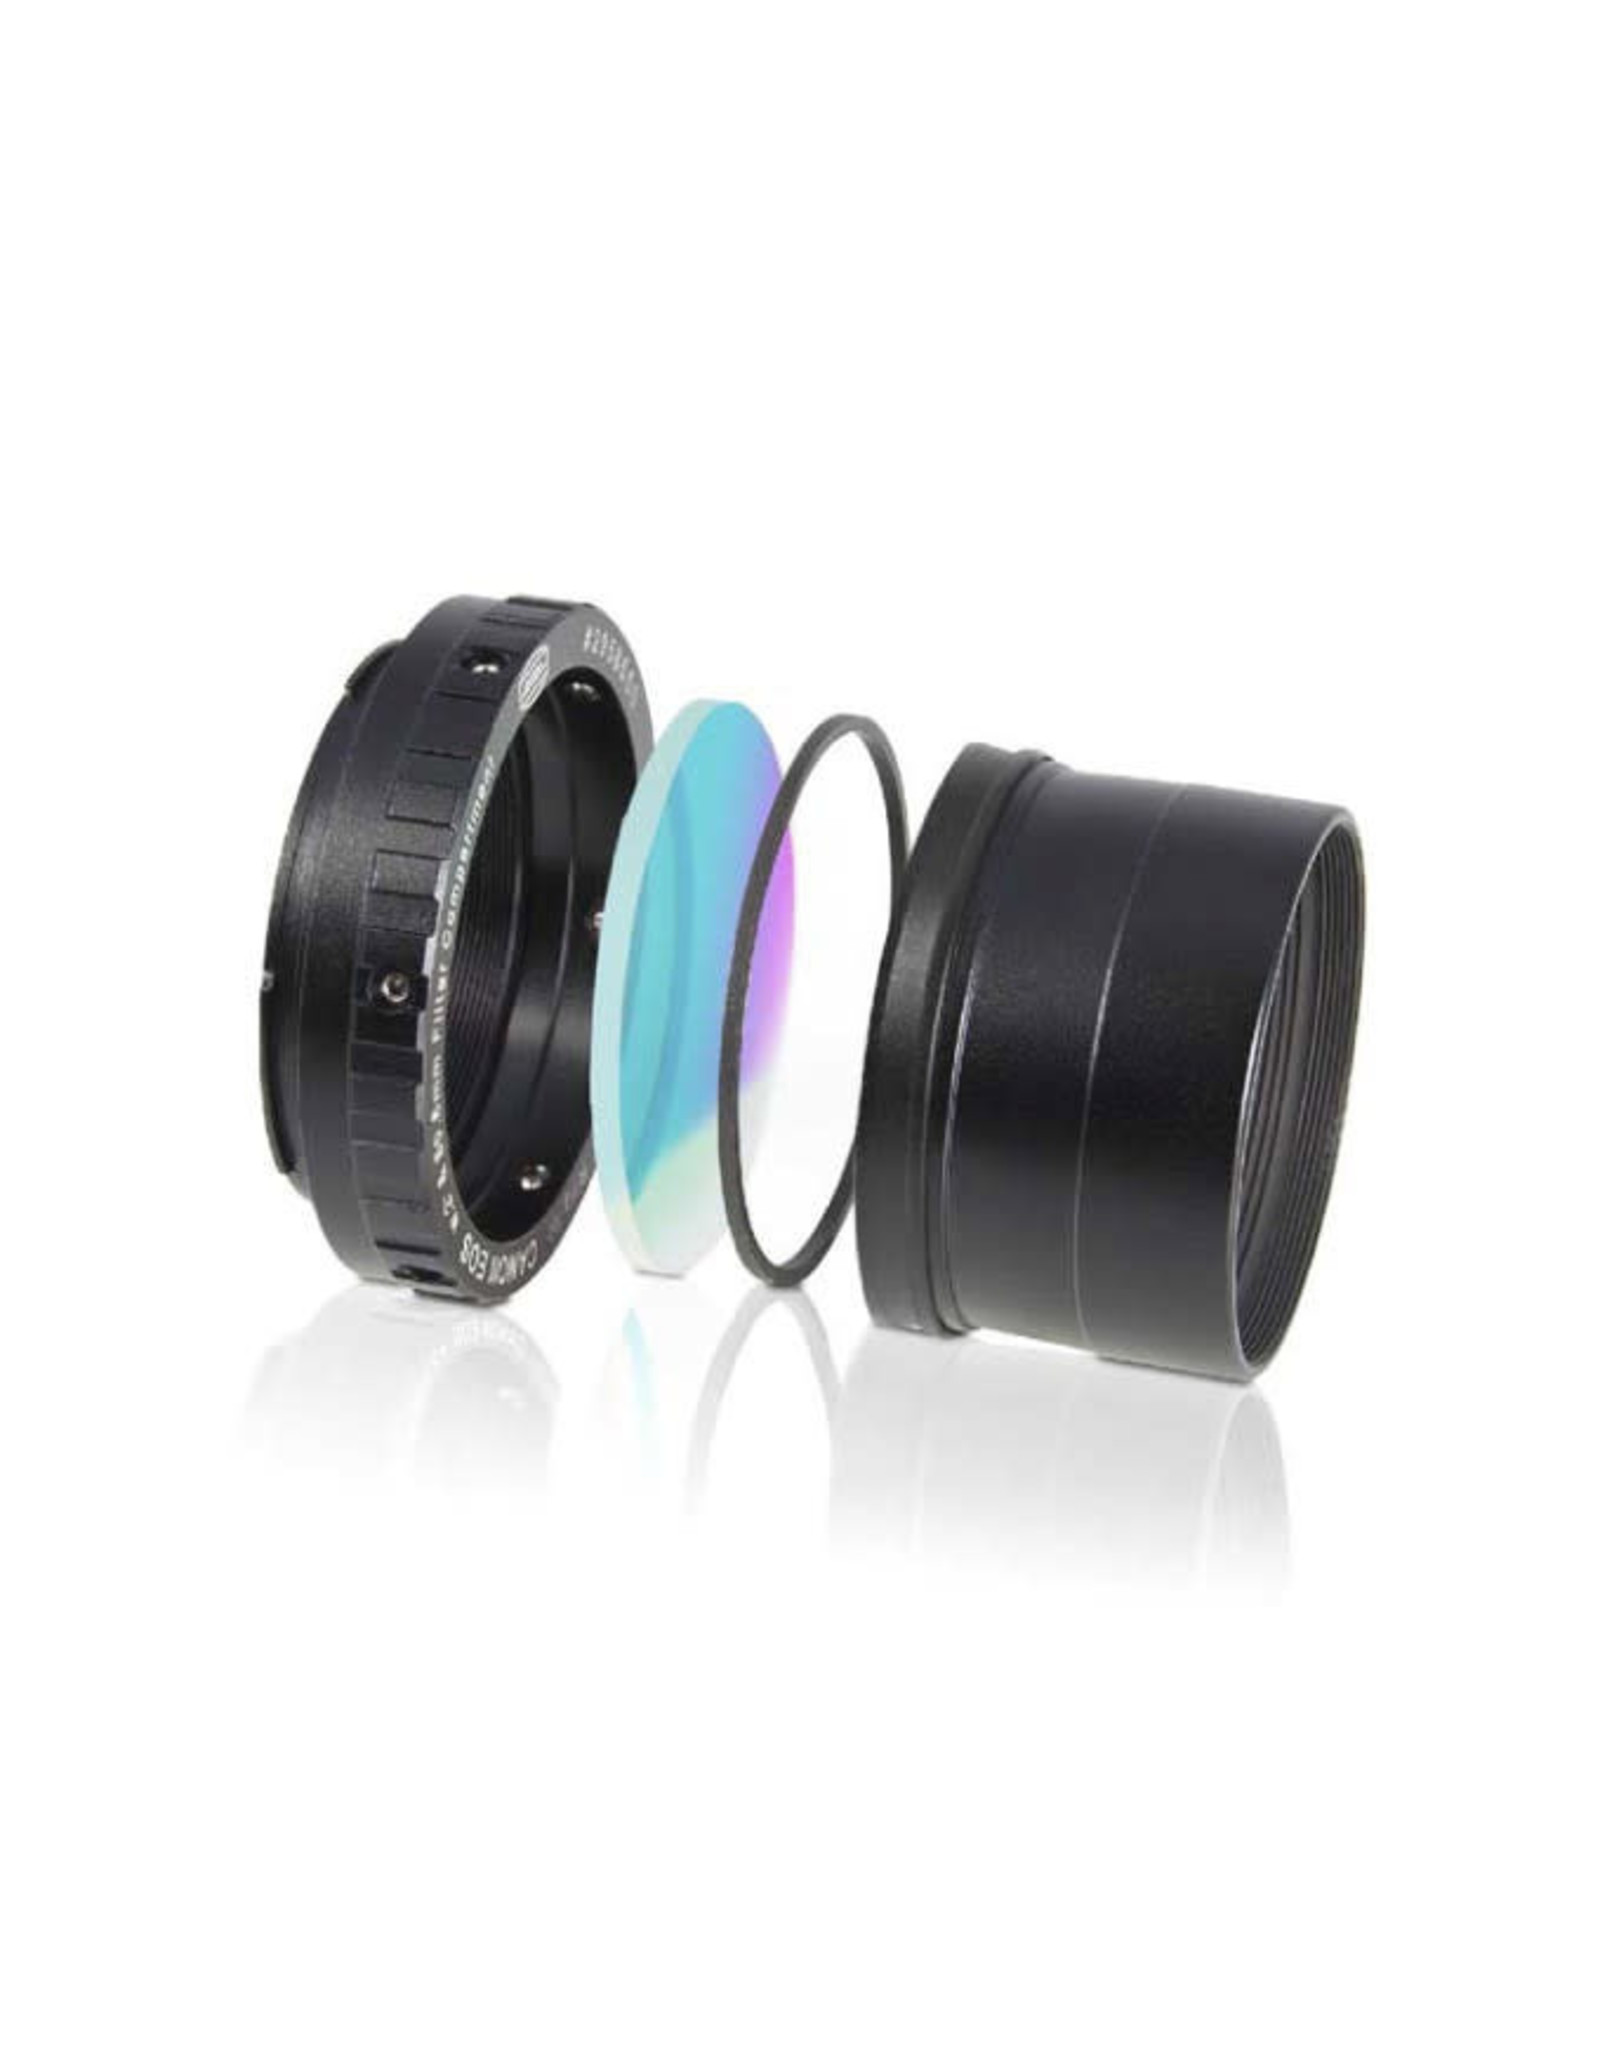 Baader Planetarium Baader EOS Protective Wide T-Ring with Clear Filter